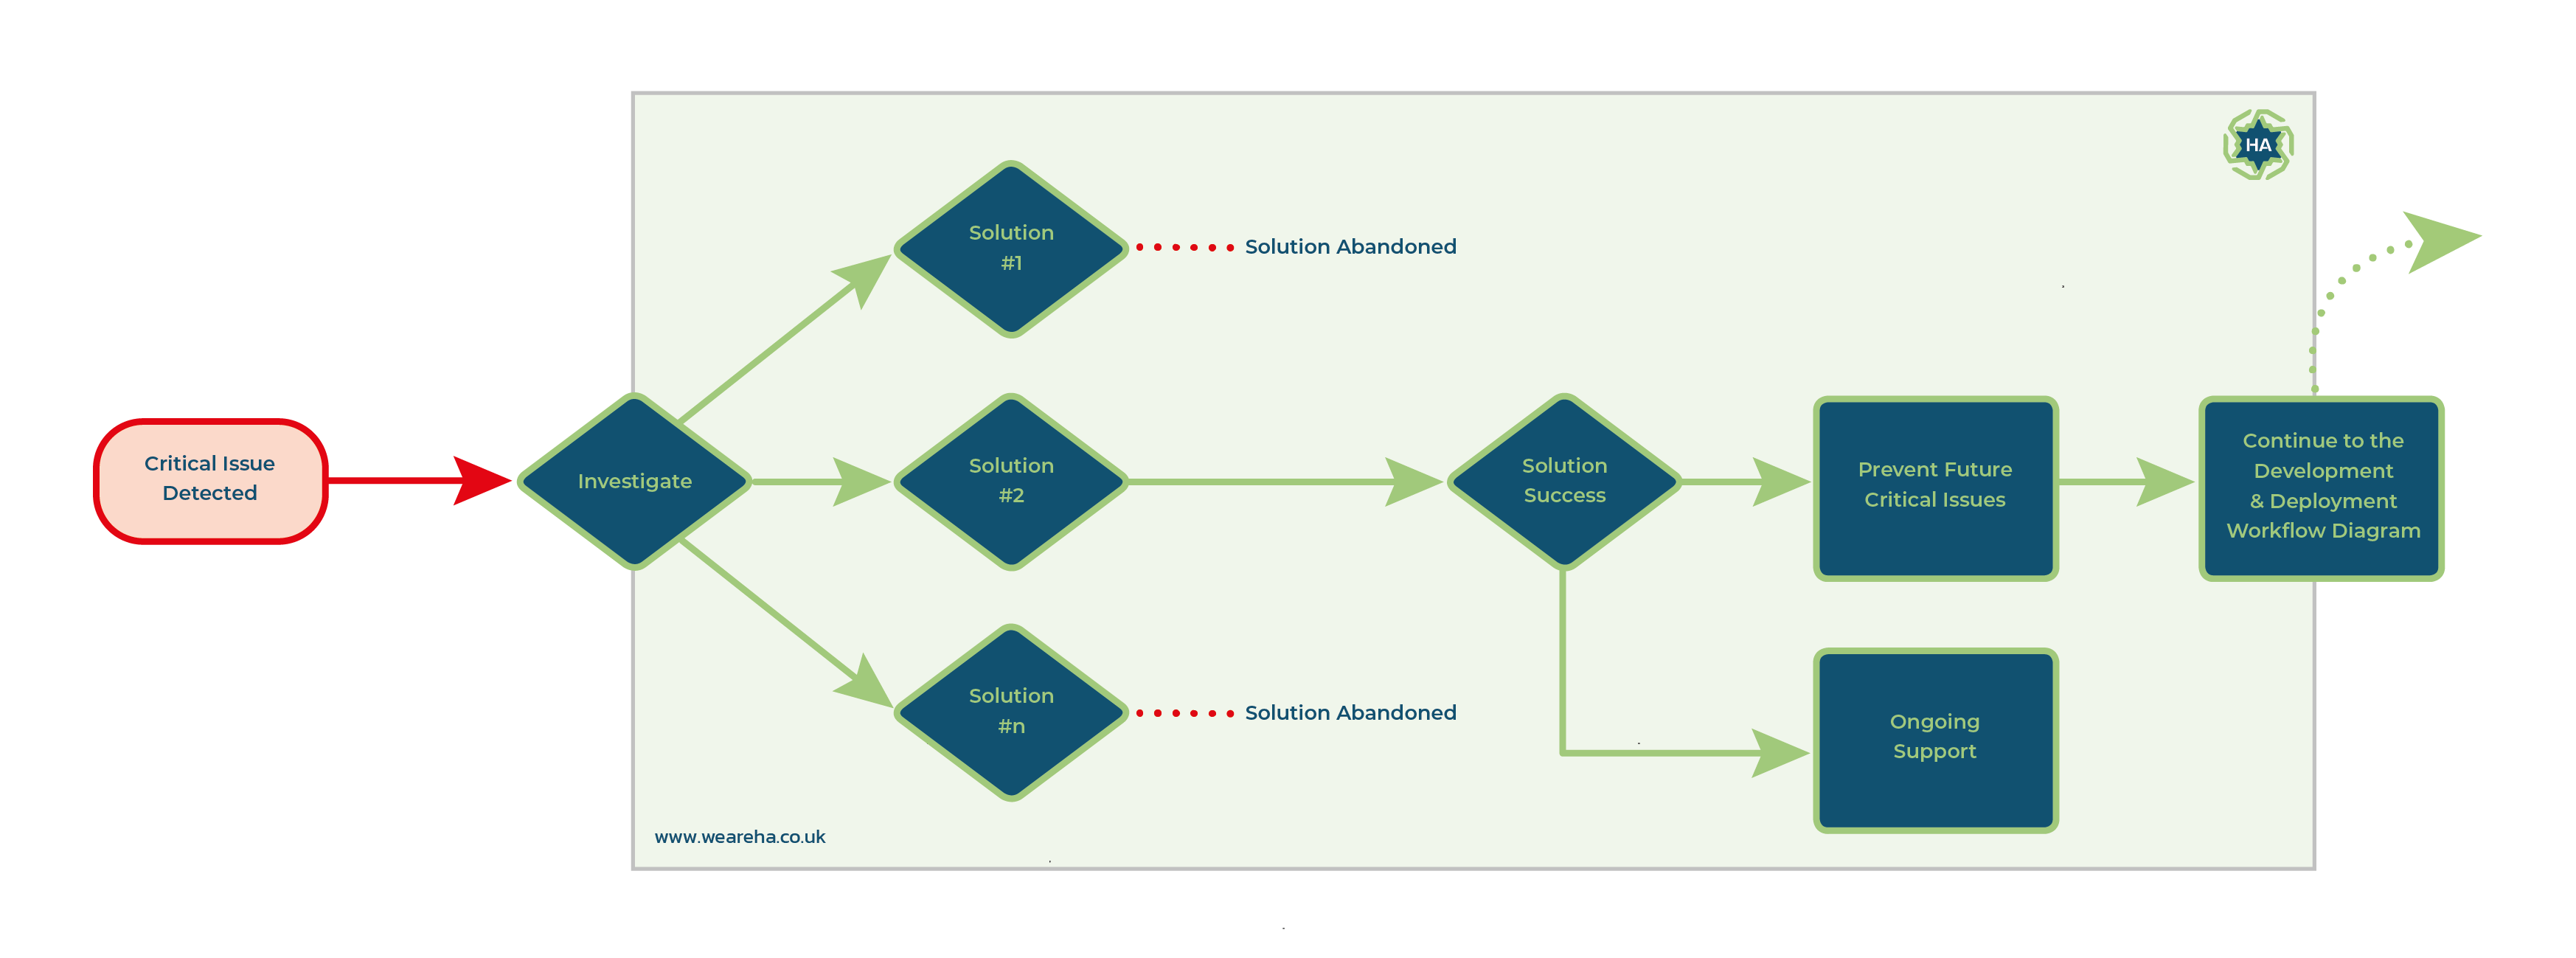 Software project rescue process diagram. The flowchart process starts with Critical Issue Detected, continuing to investigation, followed by solution discovery/abandoned. The successful solution is then applied to the issue. Ongoing support is available following the project rescue, as well as the option to prevent future critical issues (continue to the Development & Deployment Workflow Diagram to understand the method used to prevent future critical issues).